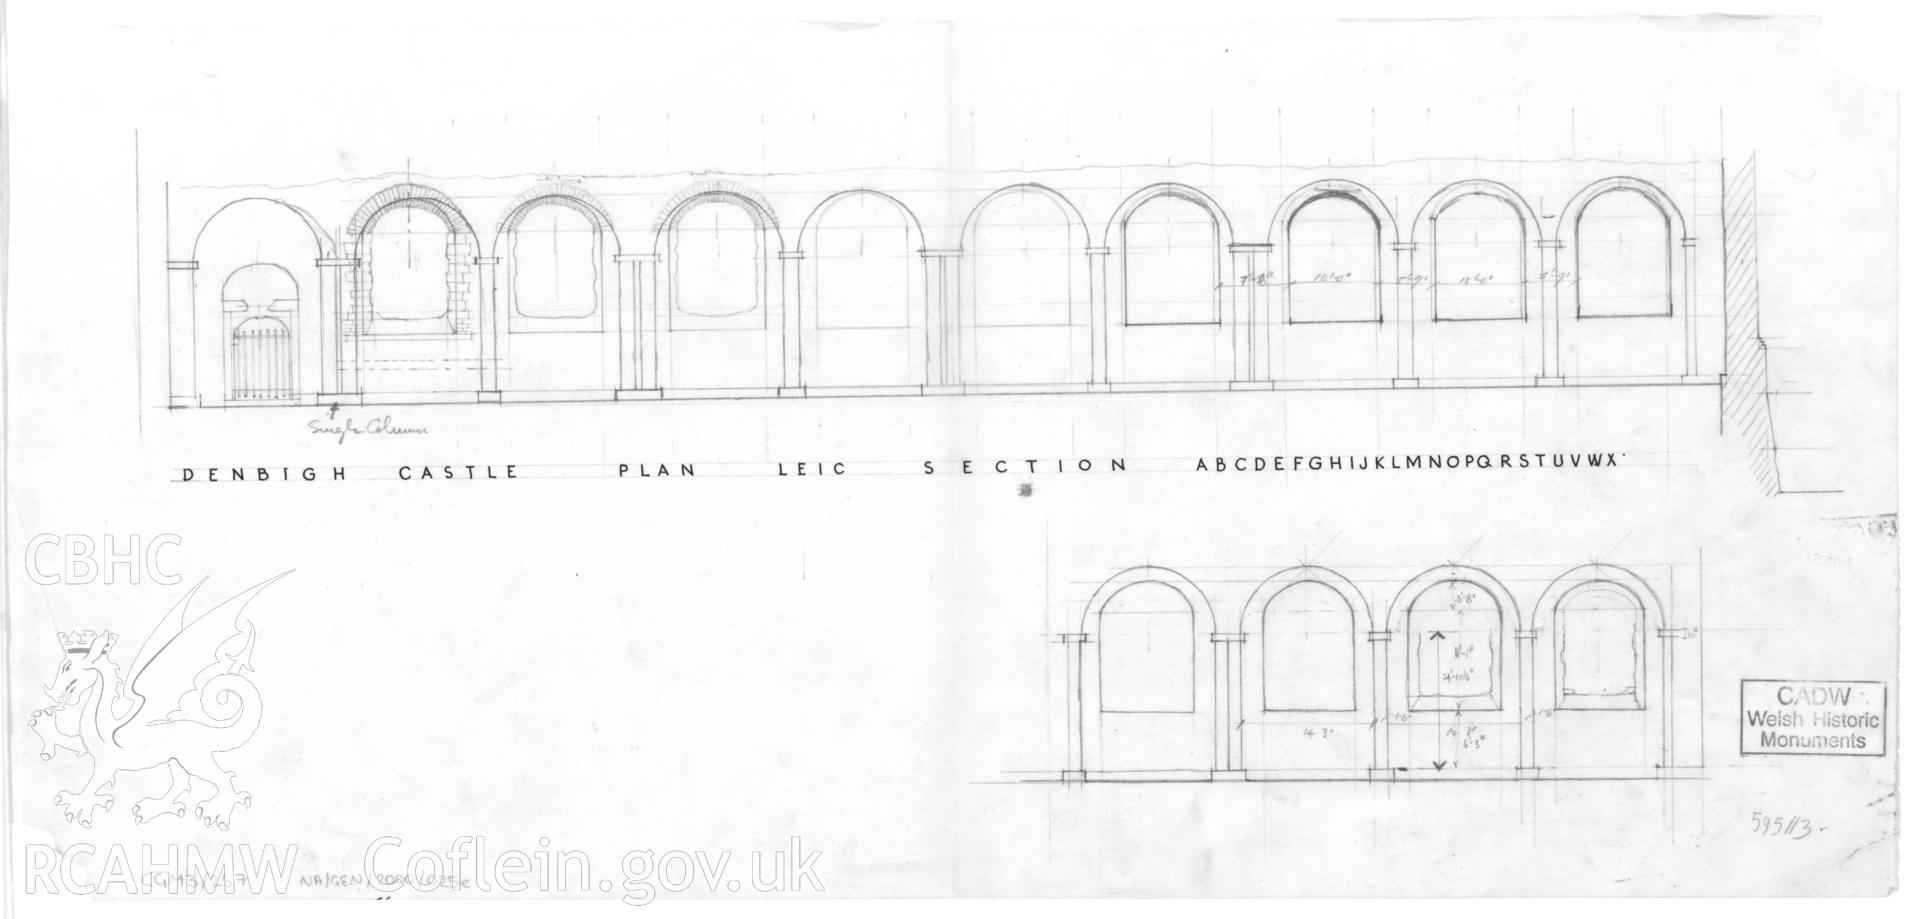 Cadw guardianship monument drawing of Denbigh Leicester's Church. Study to reconstruct internal elevs. Cadw Ref: 595//3. Scale 1:96.